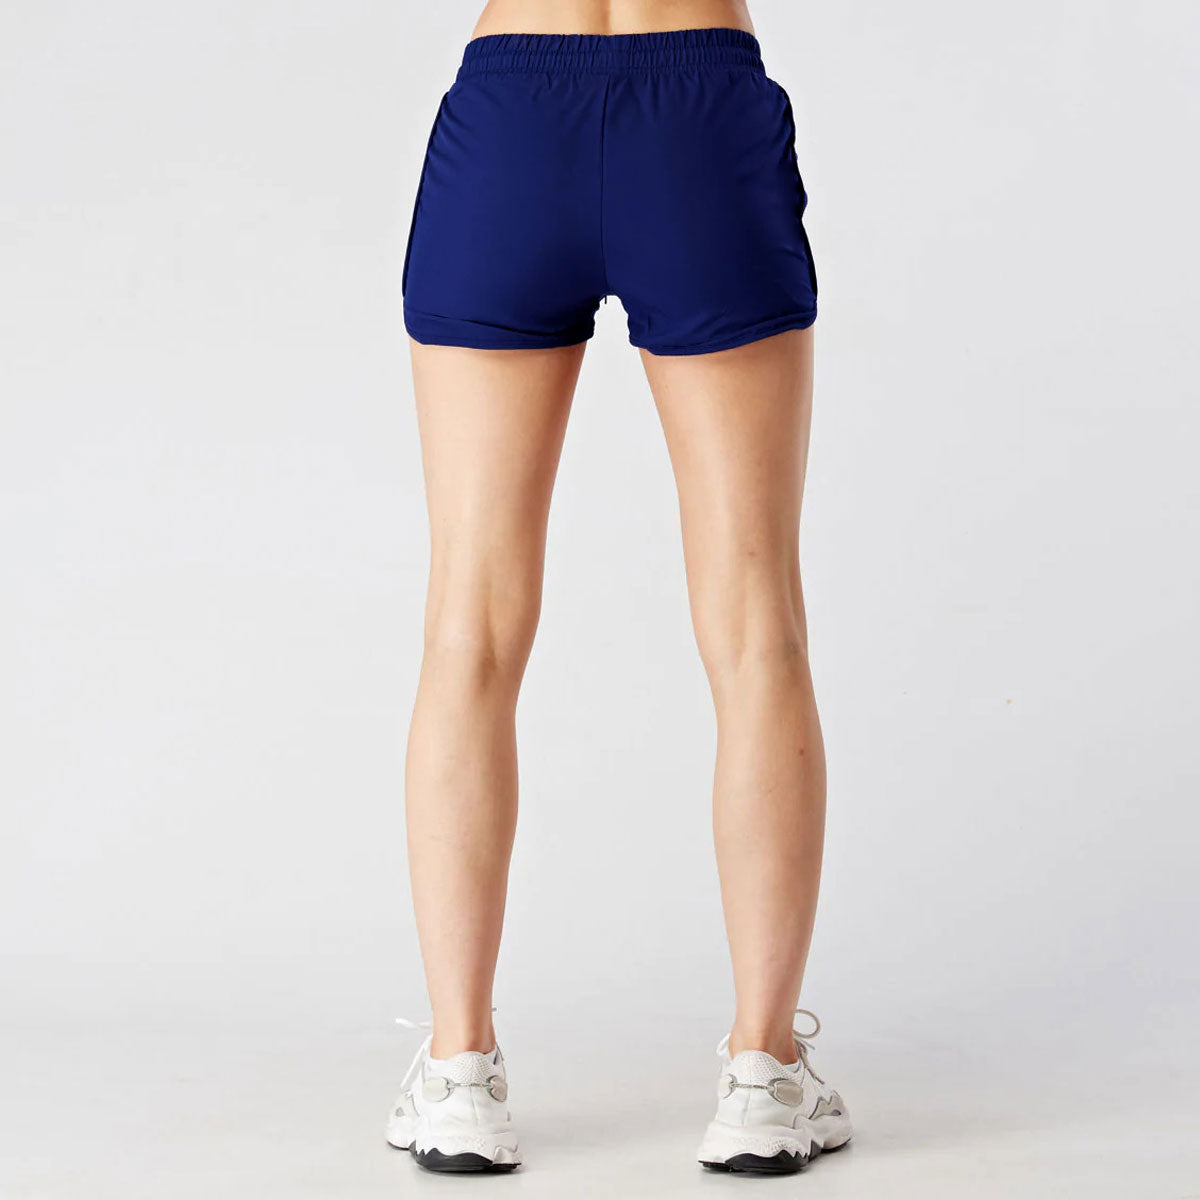 RONEX Women's Micro Stretched Booty Hotpant  Shorts